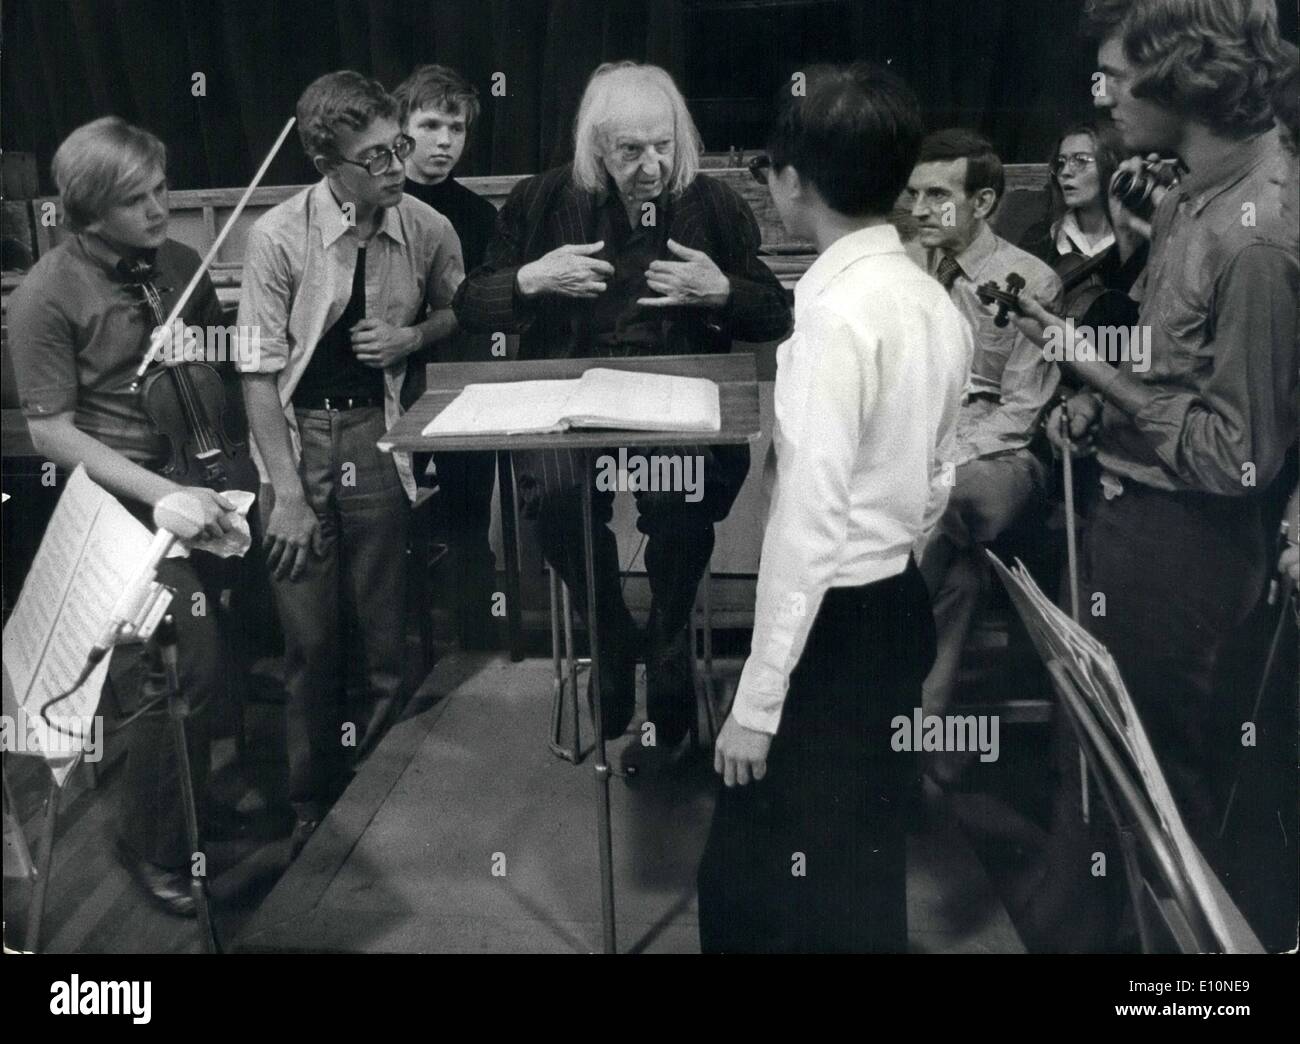 Aug. 08, 1973 - LEOPOLD STOKOWSKI AT REHEARSALS. LEOPOLD STOKOWSKI, 91, has a keen audience during rehearsals in London yesterday for the International Festival of Youth Orchestras' grand finale which he will conduct at the Royal Albert Hall tomorrow. Stock Photo